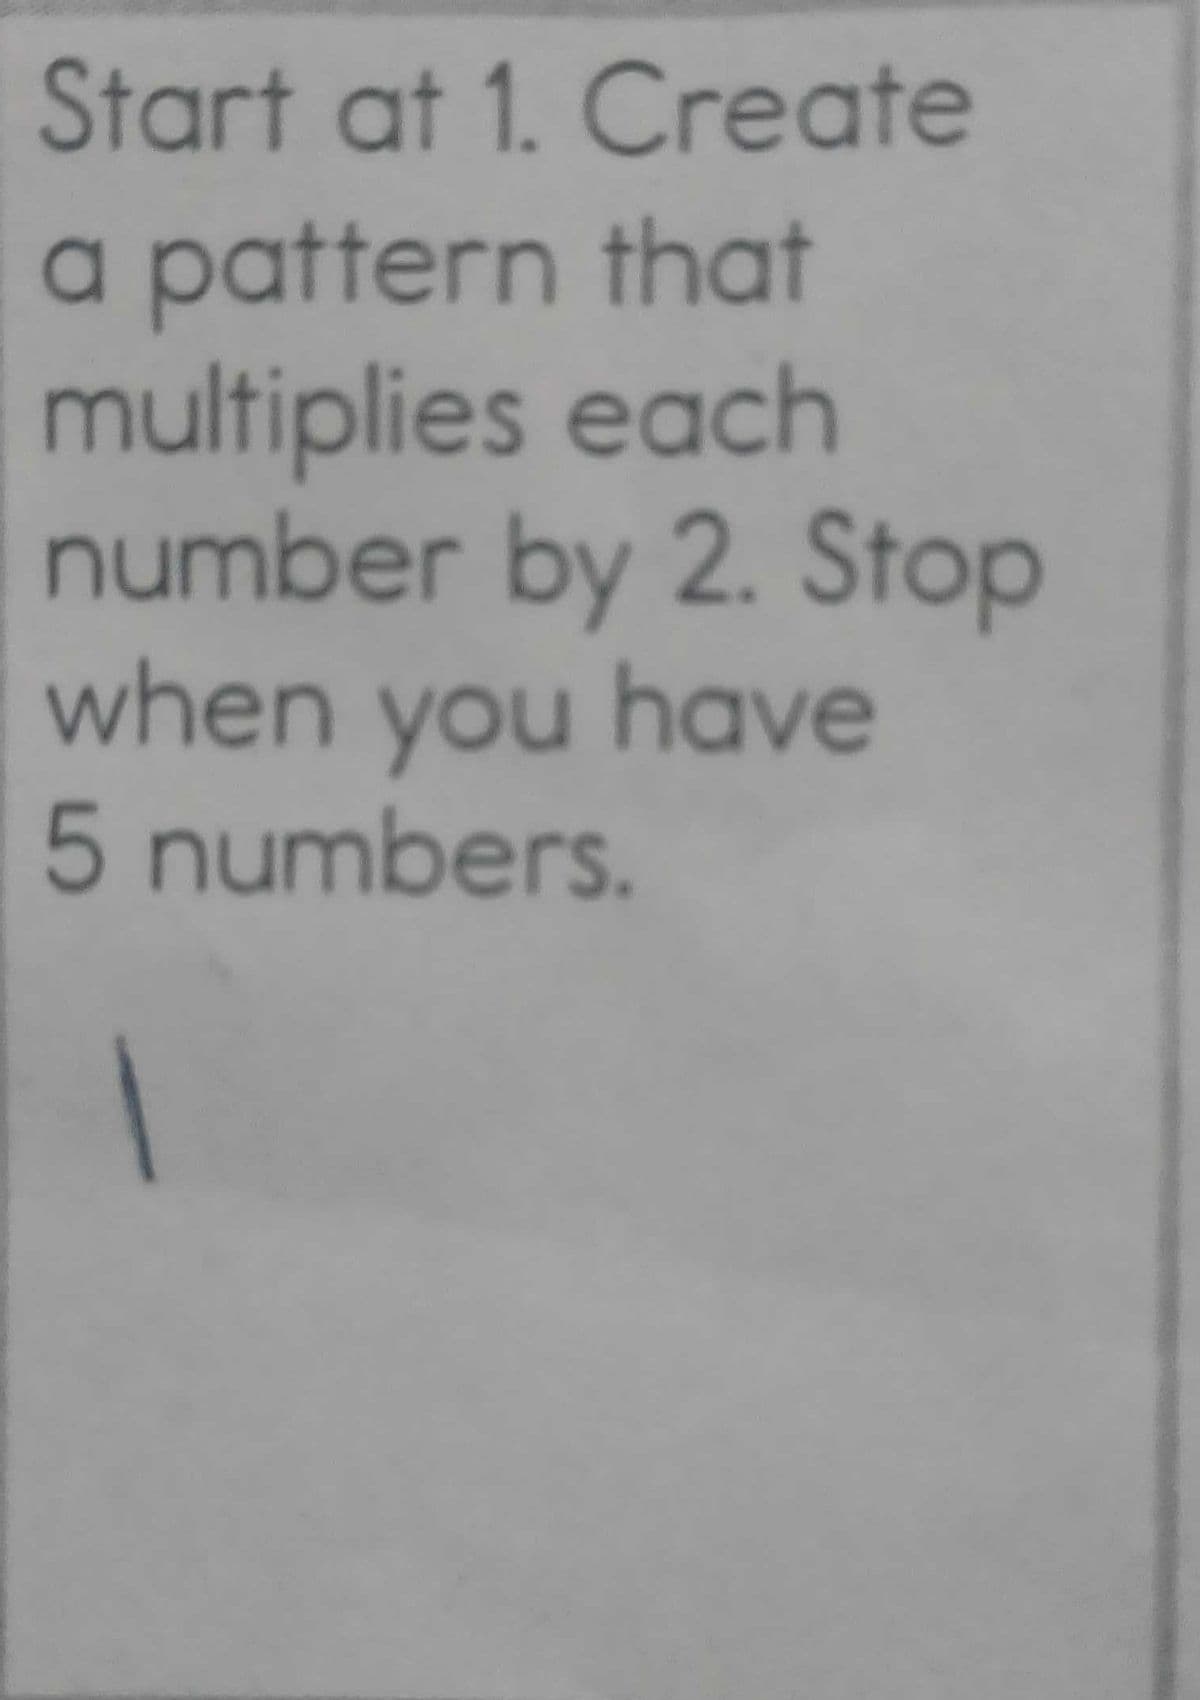 Start at 1. Create
a pattern that
multiplies each
number by 2. Stop
when you have
5 numbers.
